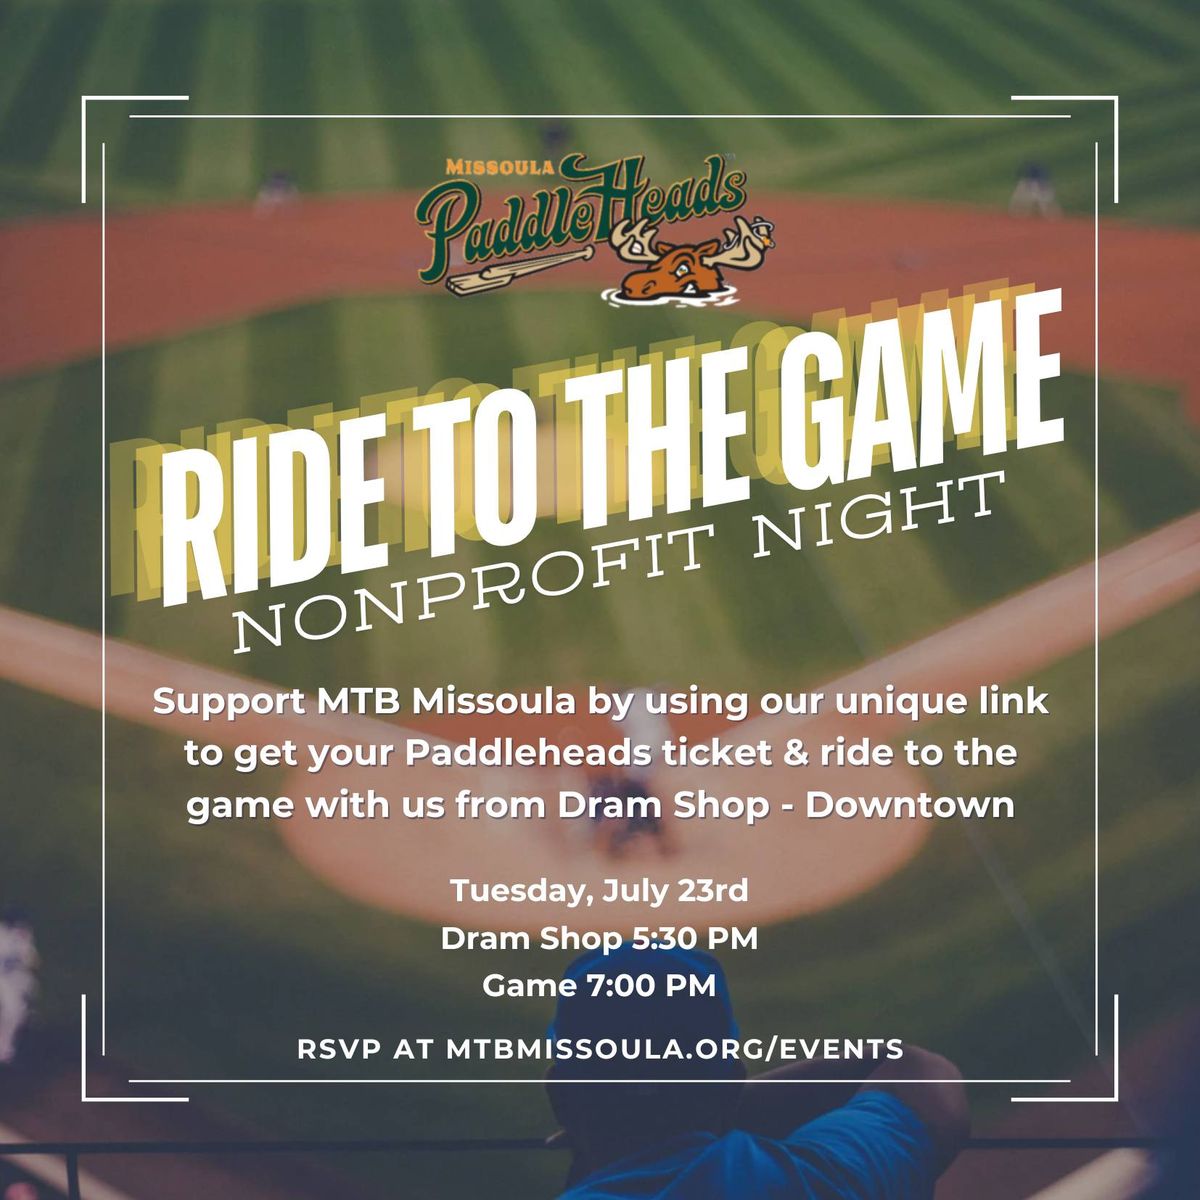 Ride to the Game! Paddleheads Nonprofit Night